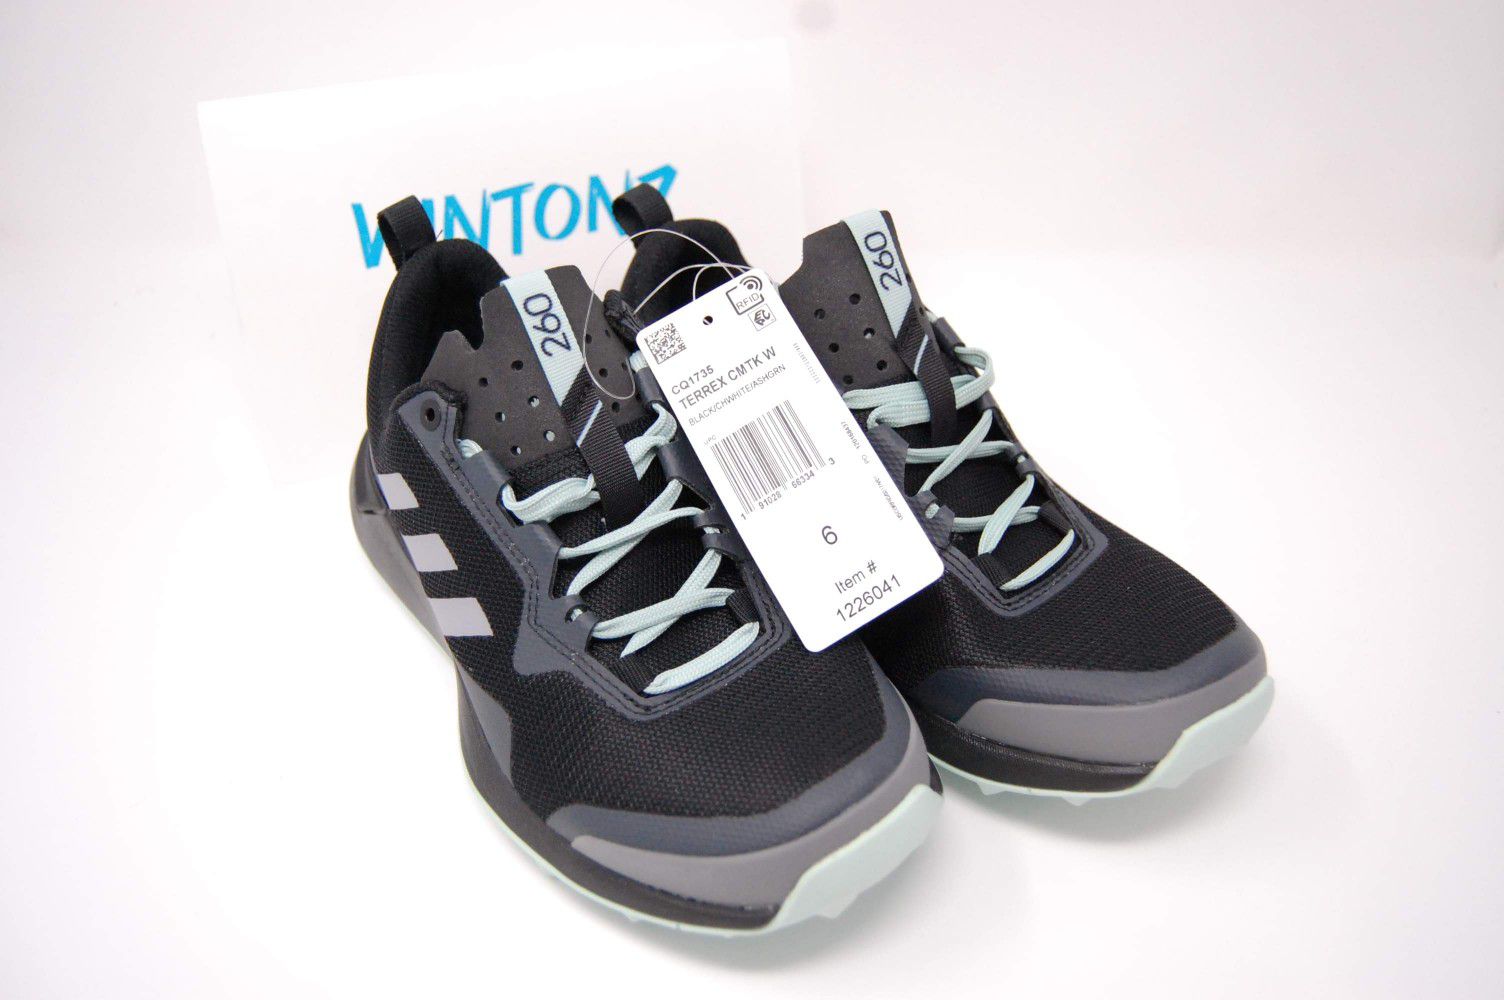 Adidas Terrex CMTK 260 Shoes Womens Size 6 Black/Chalk White/Ash Green Hiking shoes Continental Rubber.